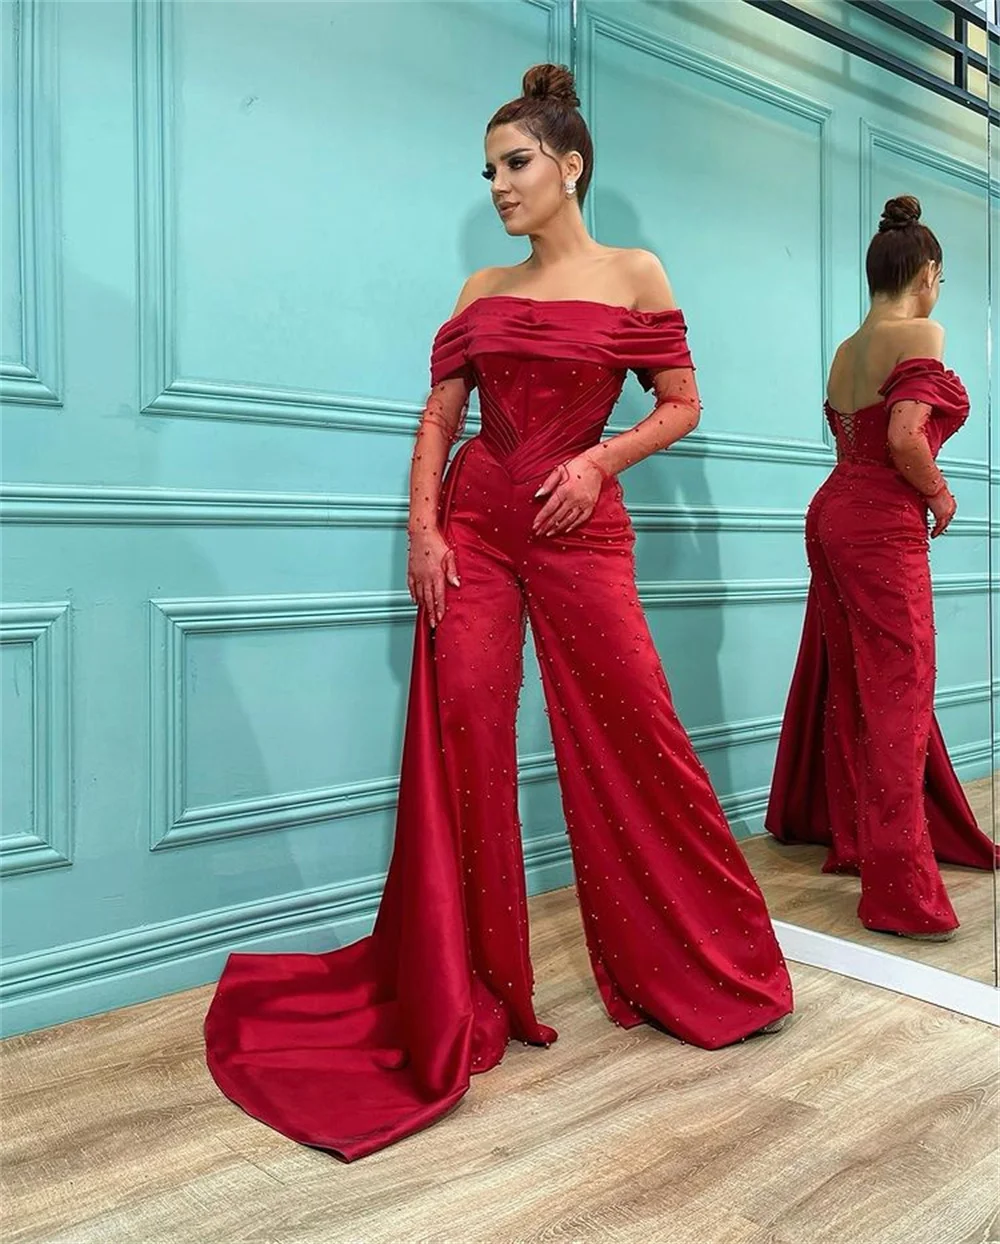 

Red Off The Shoulder Women Formal Party Gowns Pleat Pearls Satin Evening Dresses Pants платье Bечернее